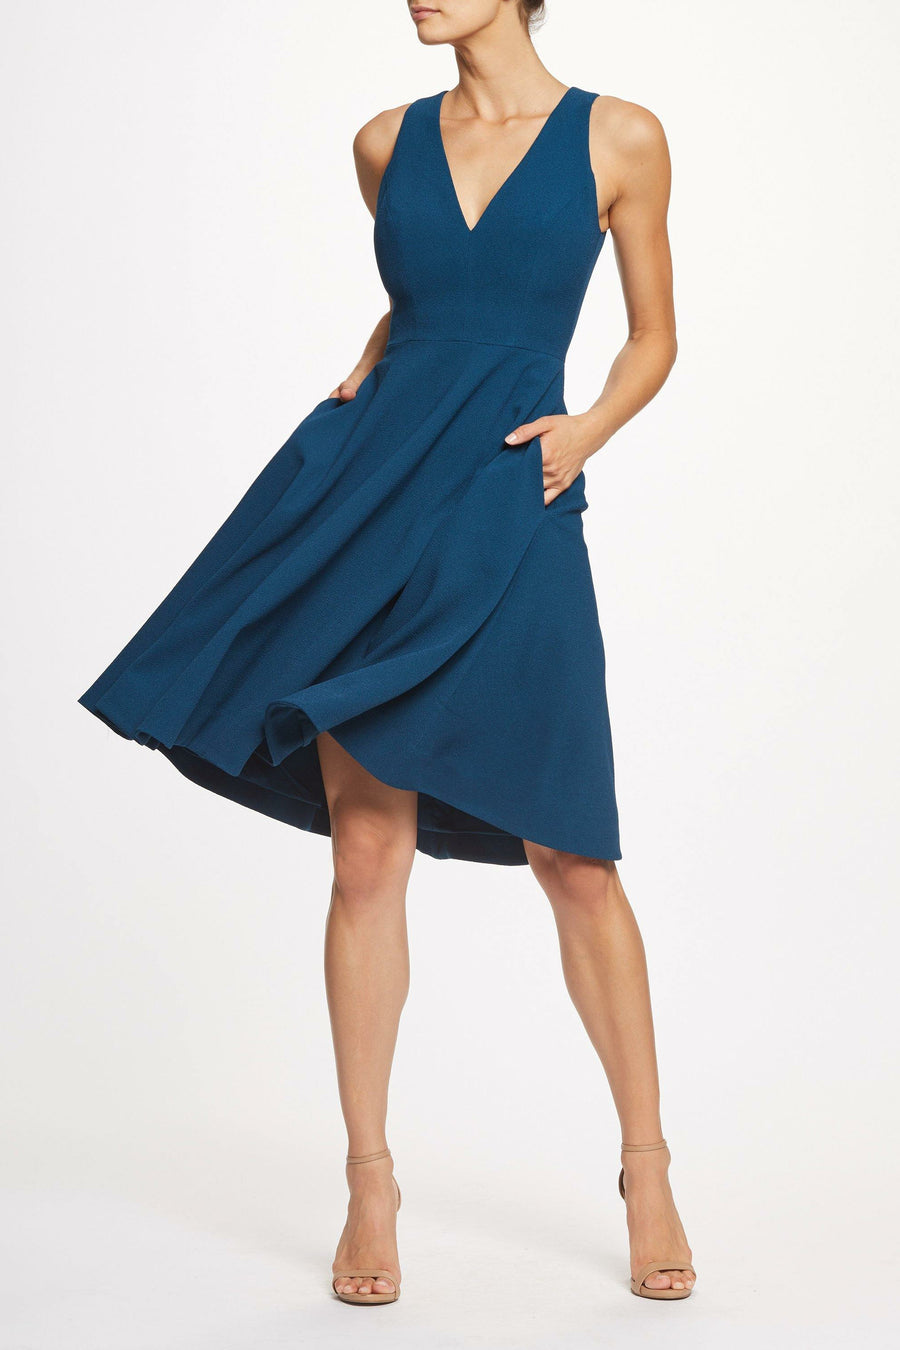 Catalina Chic Fit And Flare Cocktail Dress - Dress the Population